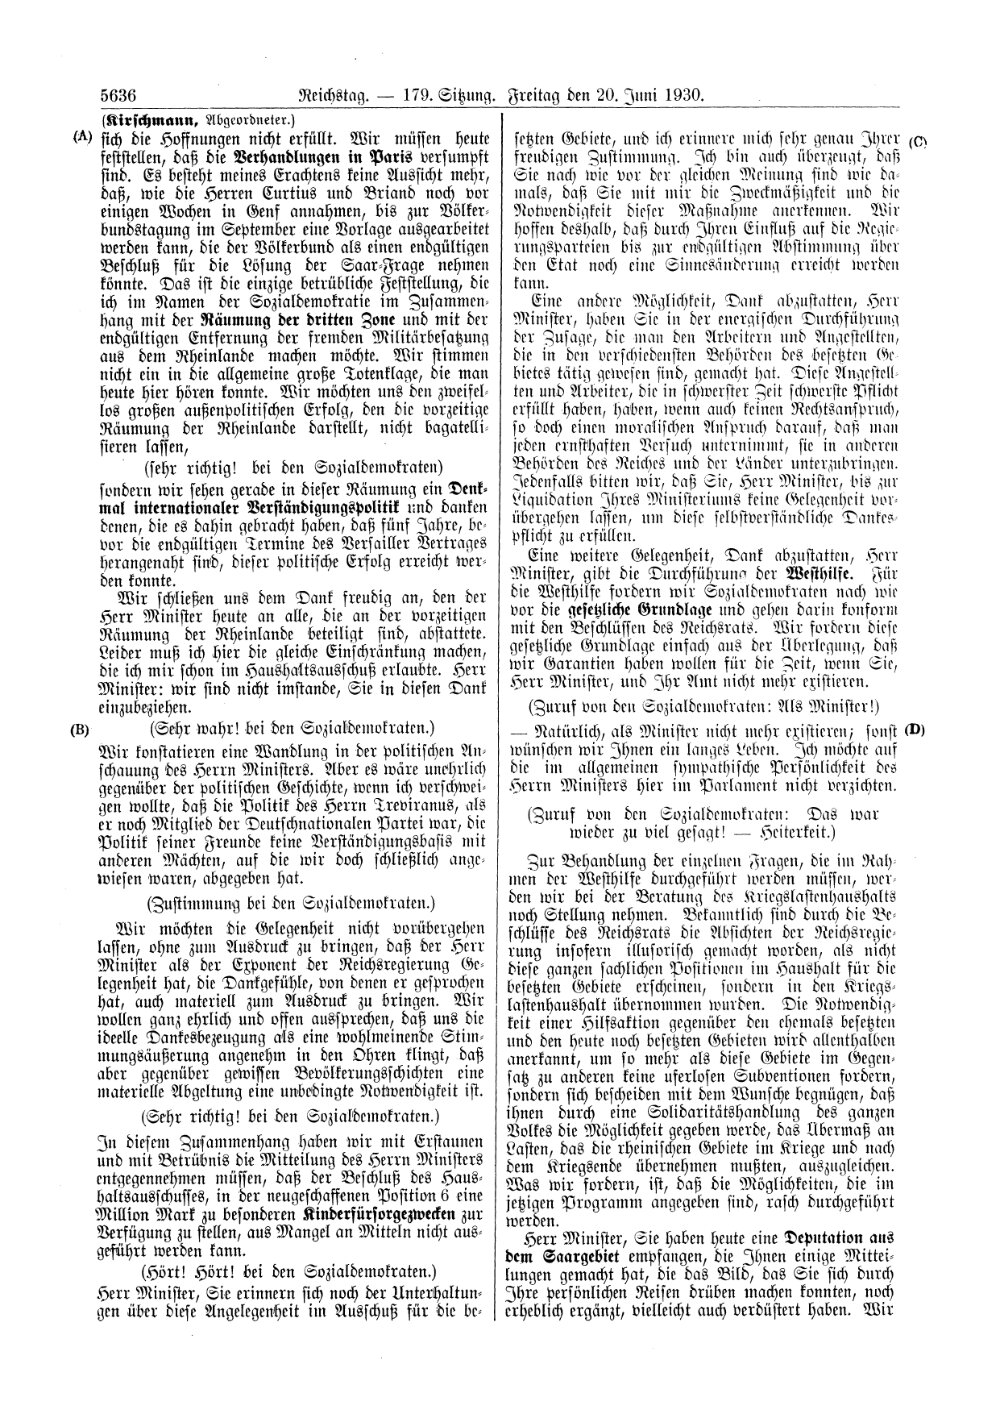 Scan of page 5636